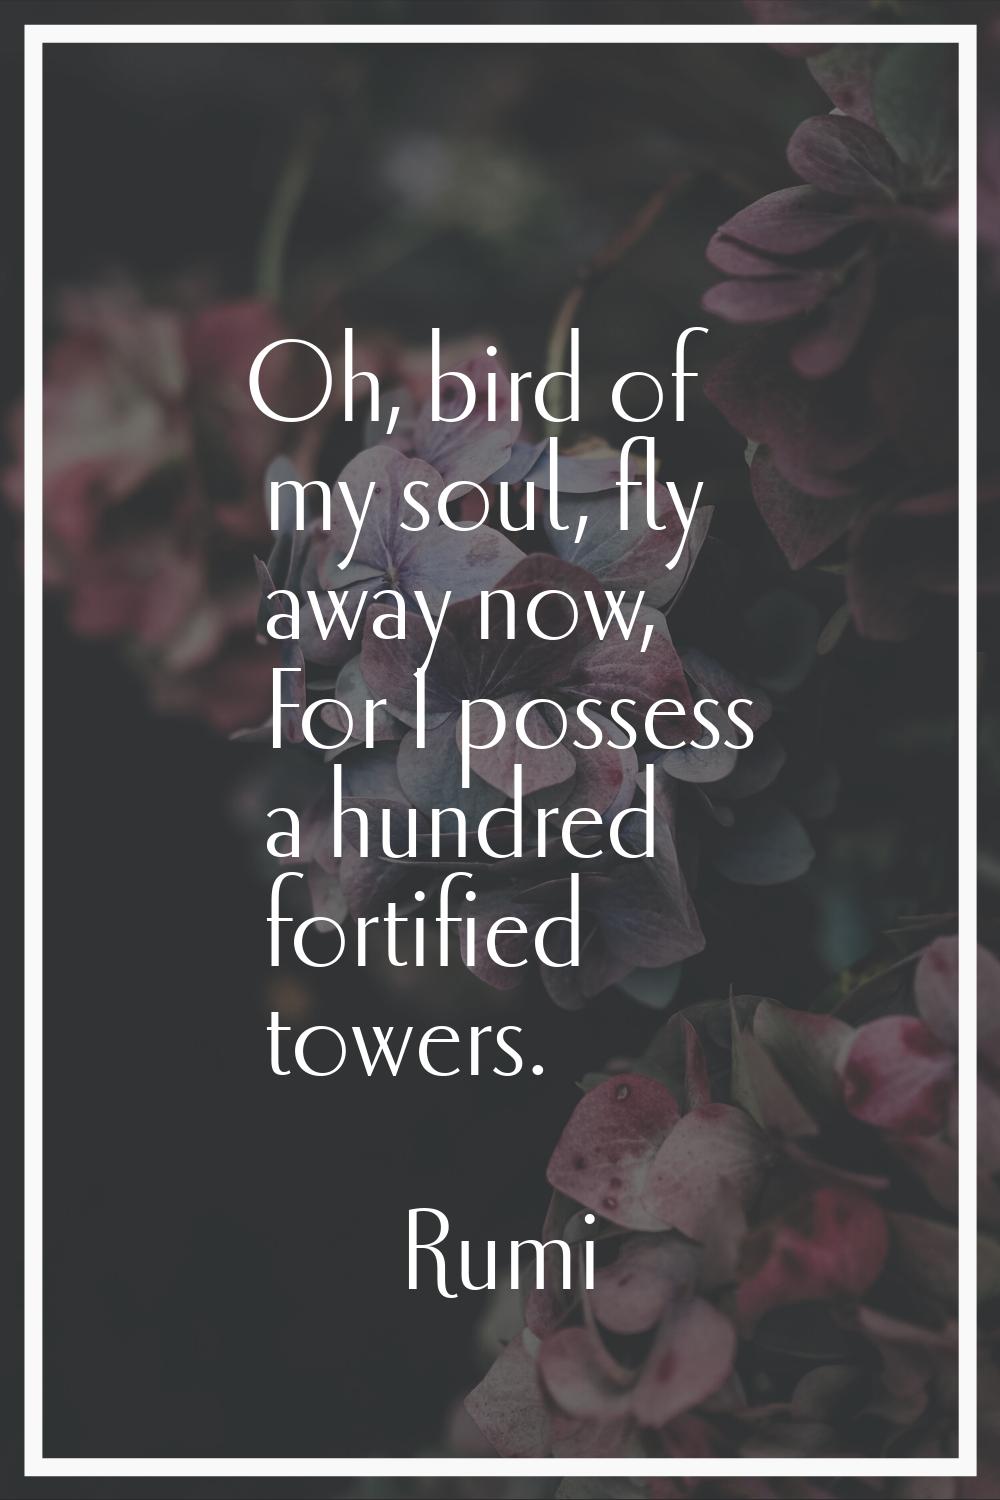 Oh, bird of my soul, fly away now, For I possess a hundred fortified towers.